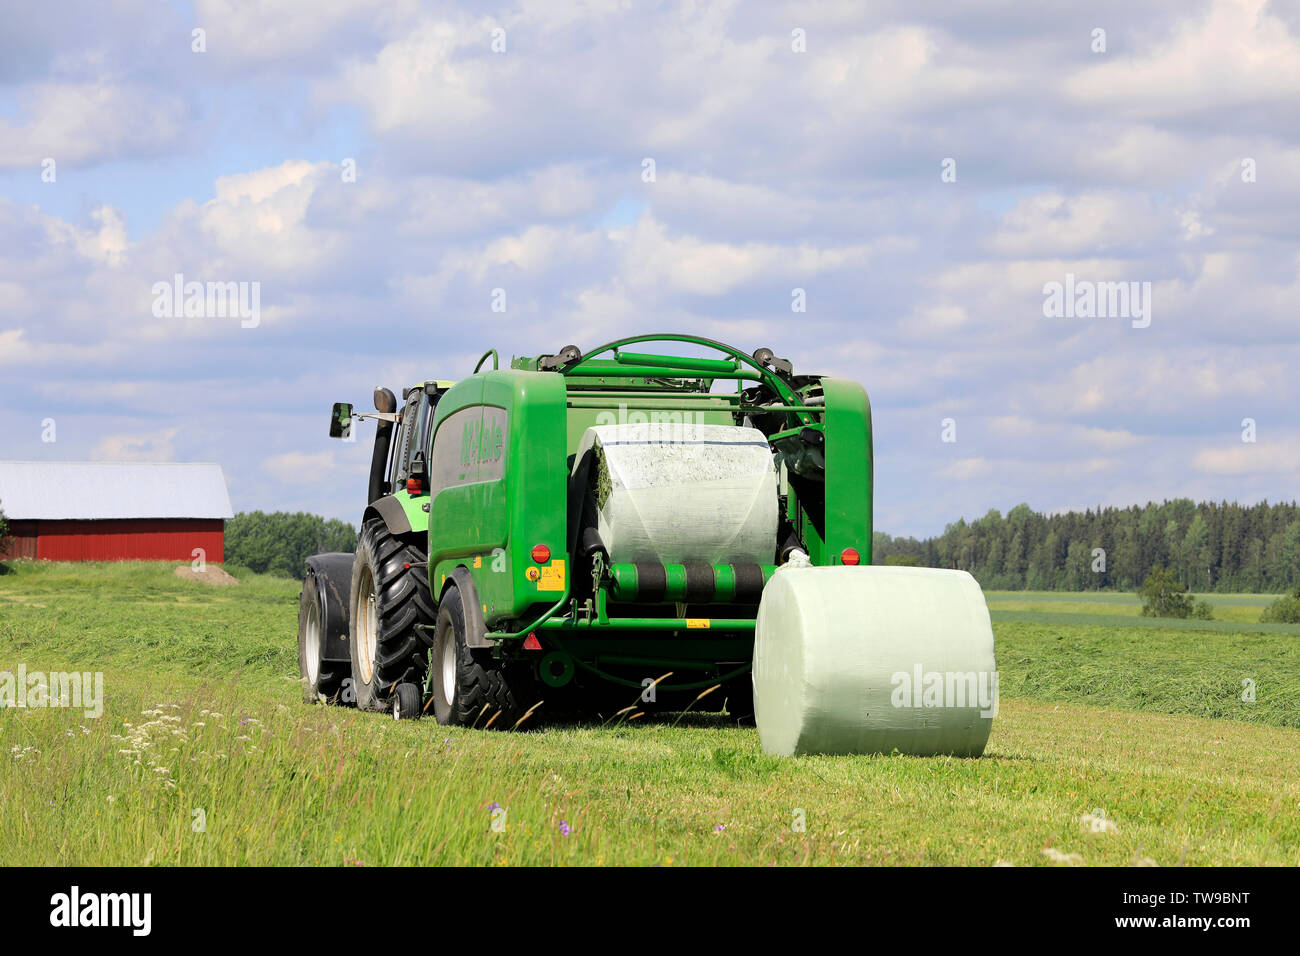 Salo, Finland. June 15, 2019. Deutz-Fahr tractor and McHale 3 plus baler baling silage in green plastic sheet in hay field on a sunny day of summer. Stock Photo